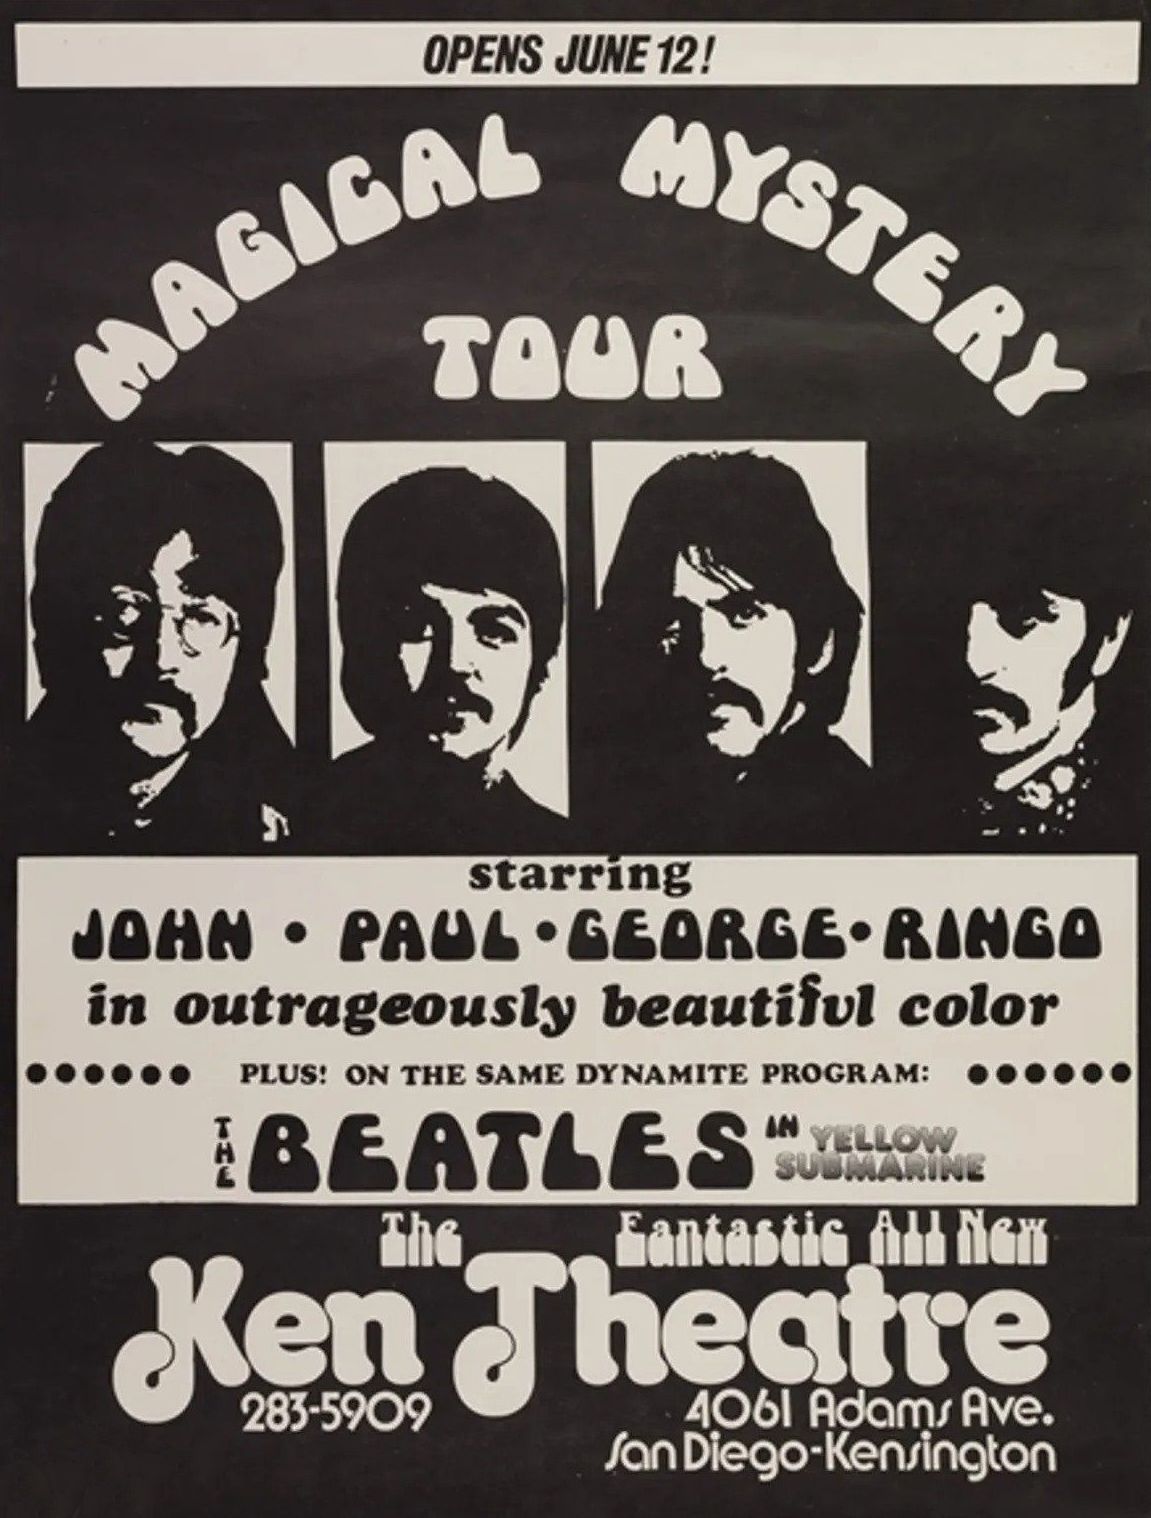 The Beatles Magical Mystery Tour Film Poster 1974 Concert Poster